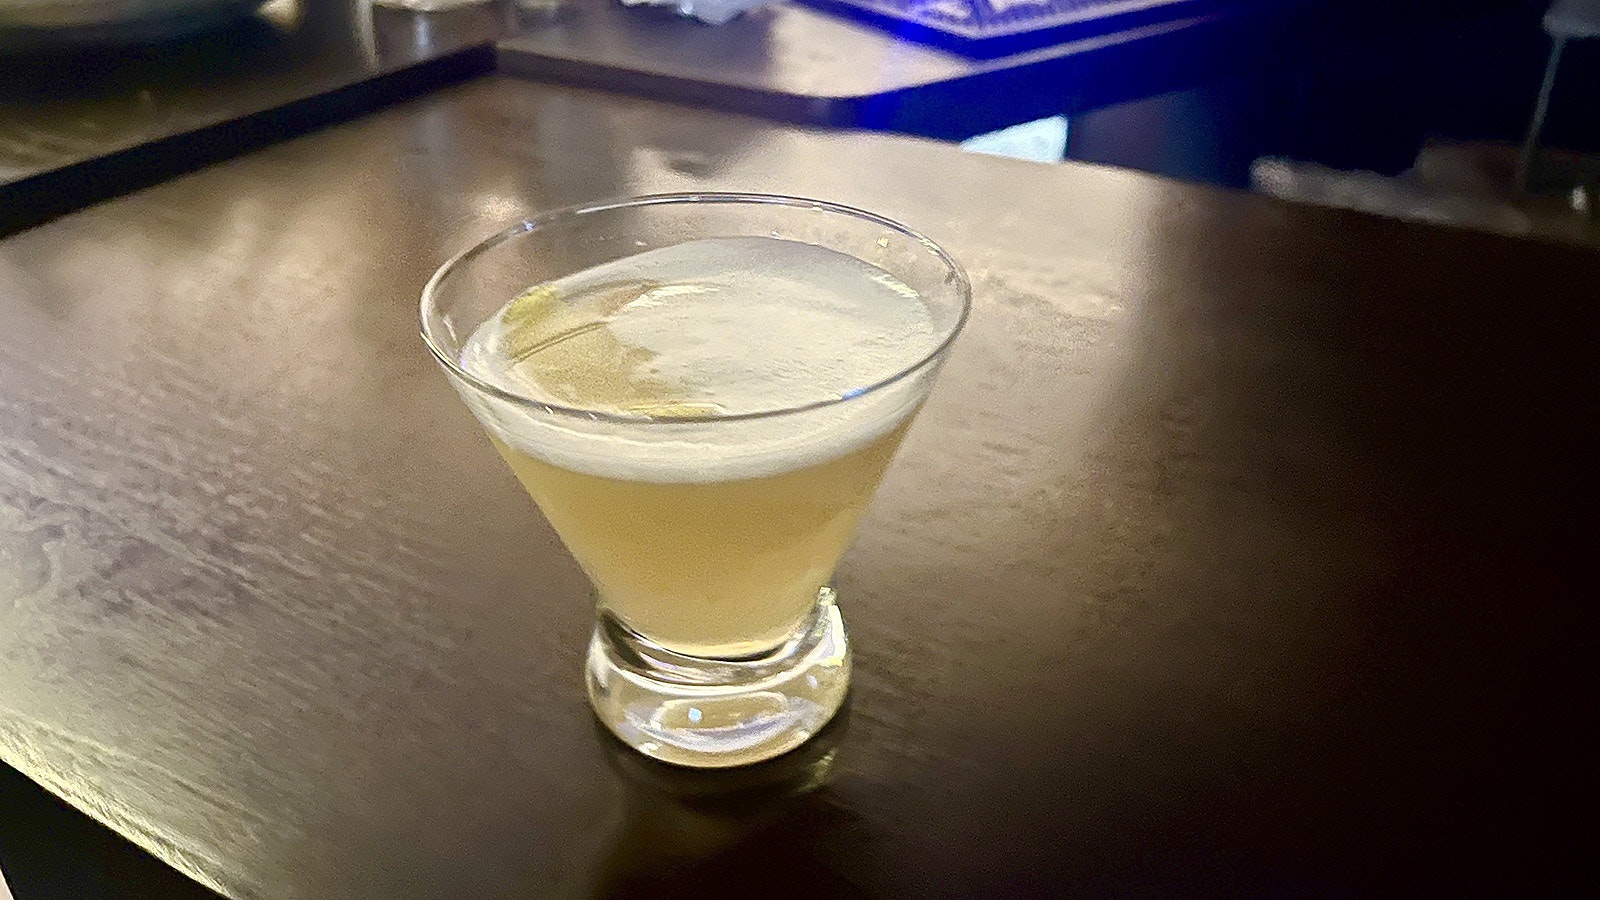 The Bees Knees is a 1920-inspired classic cocktail made with gin, lemon, honey and bitters.